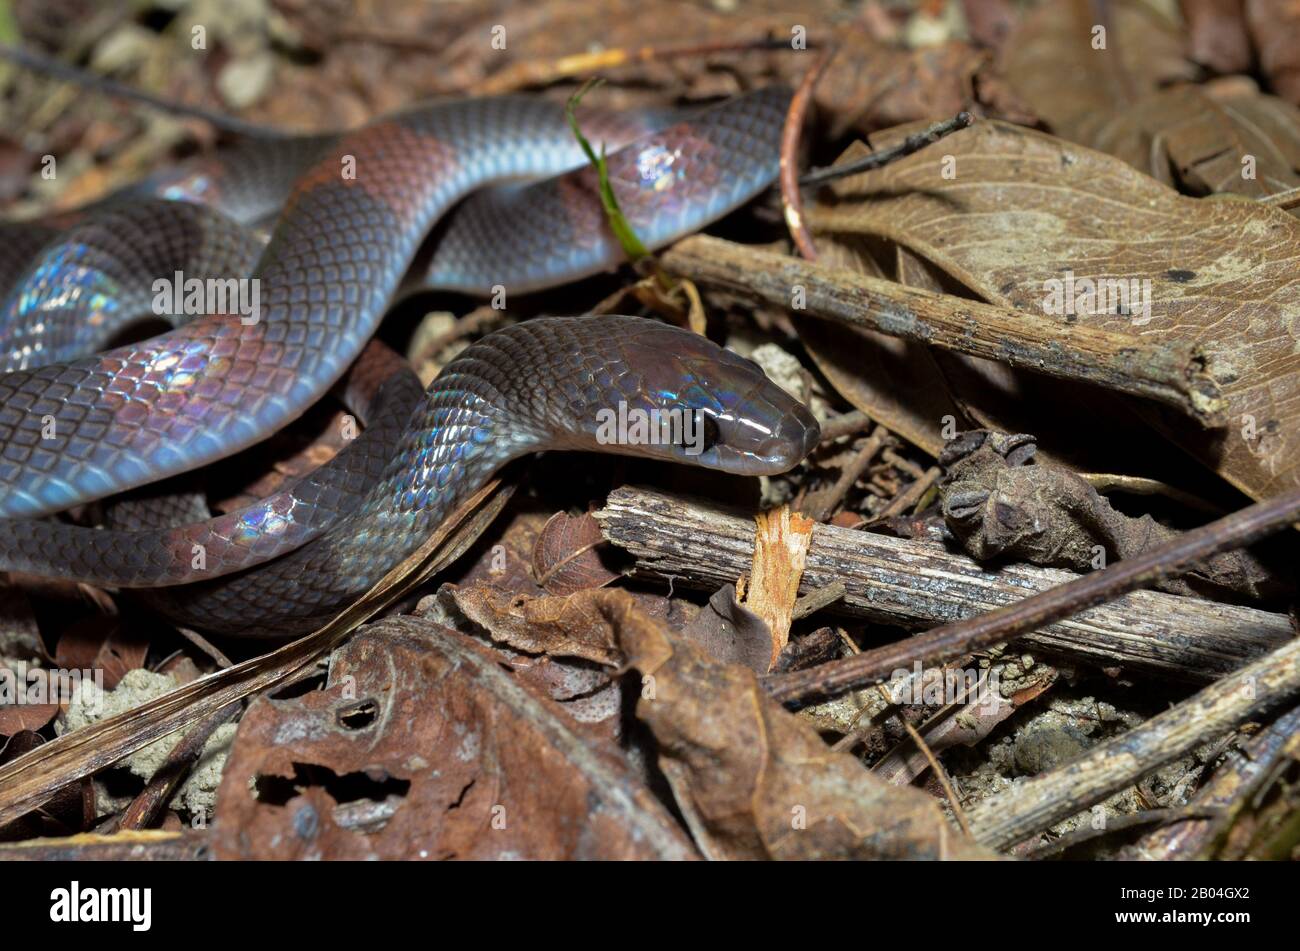 Oxyrhopus petola, commonly known as the false coral or calico snake, is a species of colubrid snake endemic to South America. Stock Photo